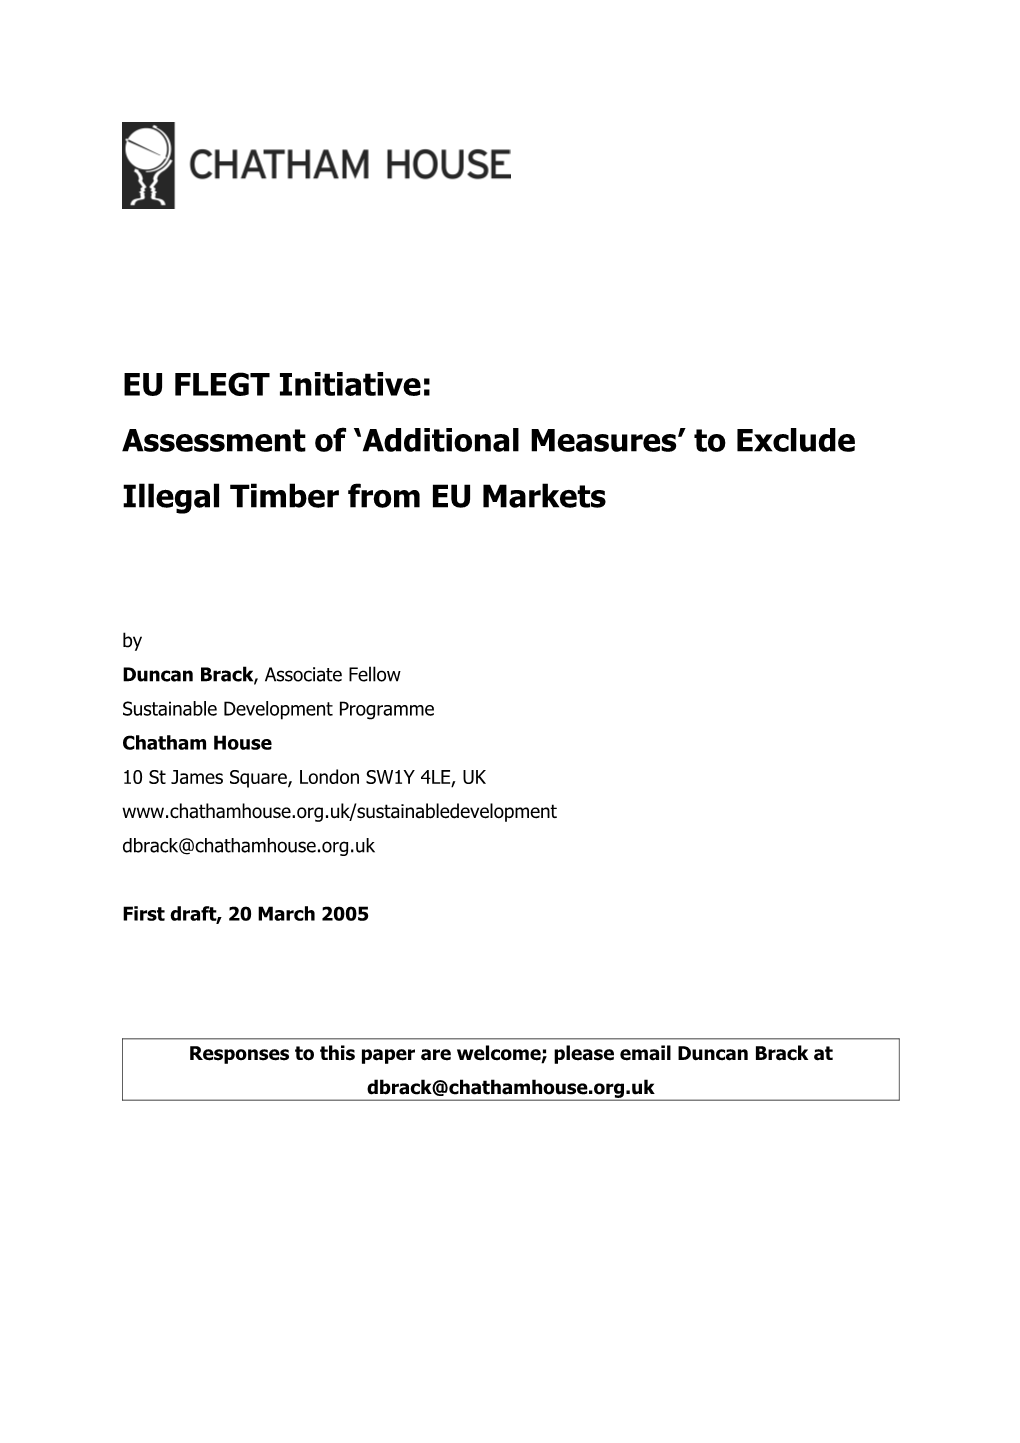 Assessment of Additional Measures to Exclude Illegal Timber from EU Markets